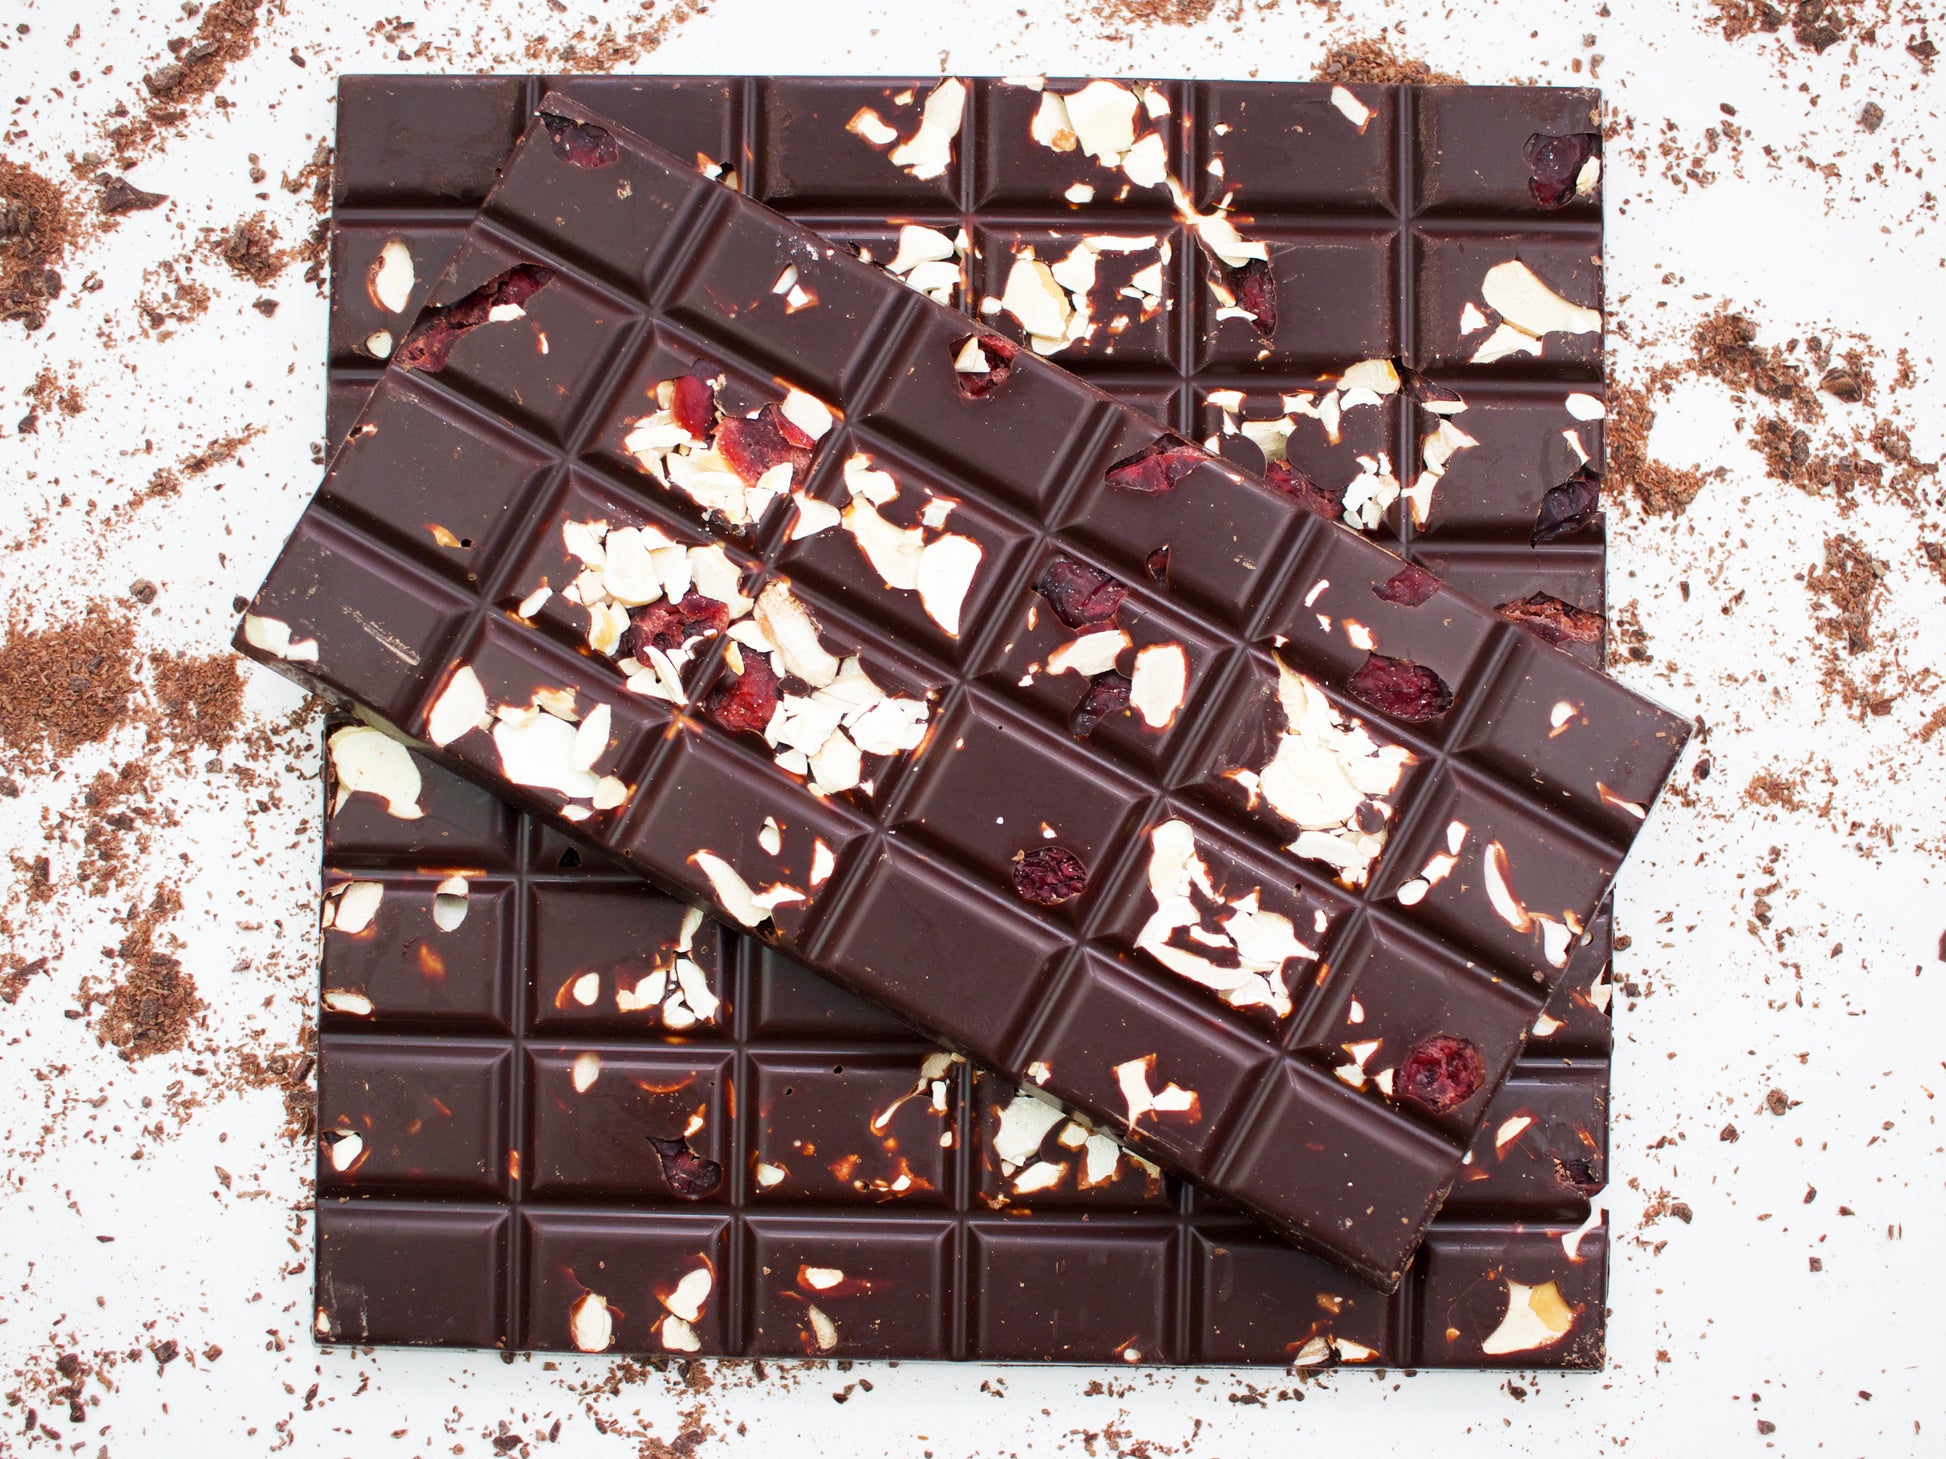 image shows 3, 100g hand made bars of dark chocolate embedded with cranberries and pieces of almonds.ark cho